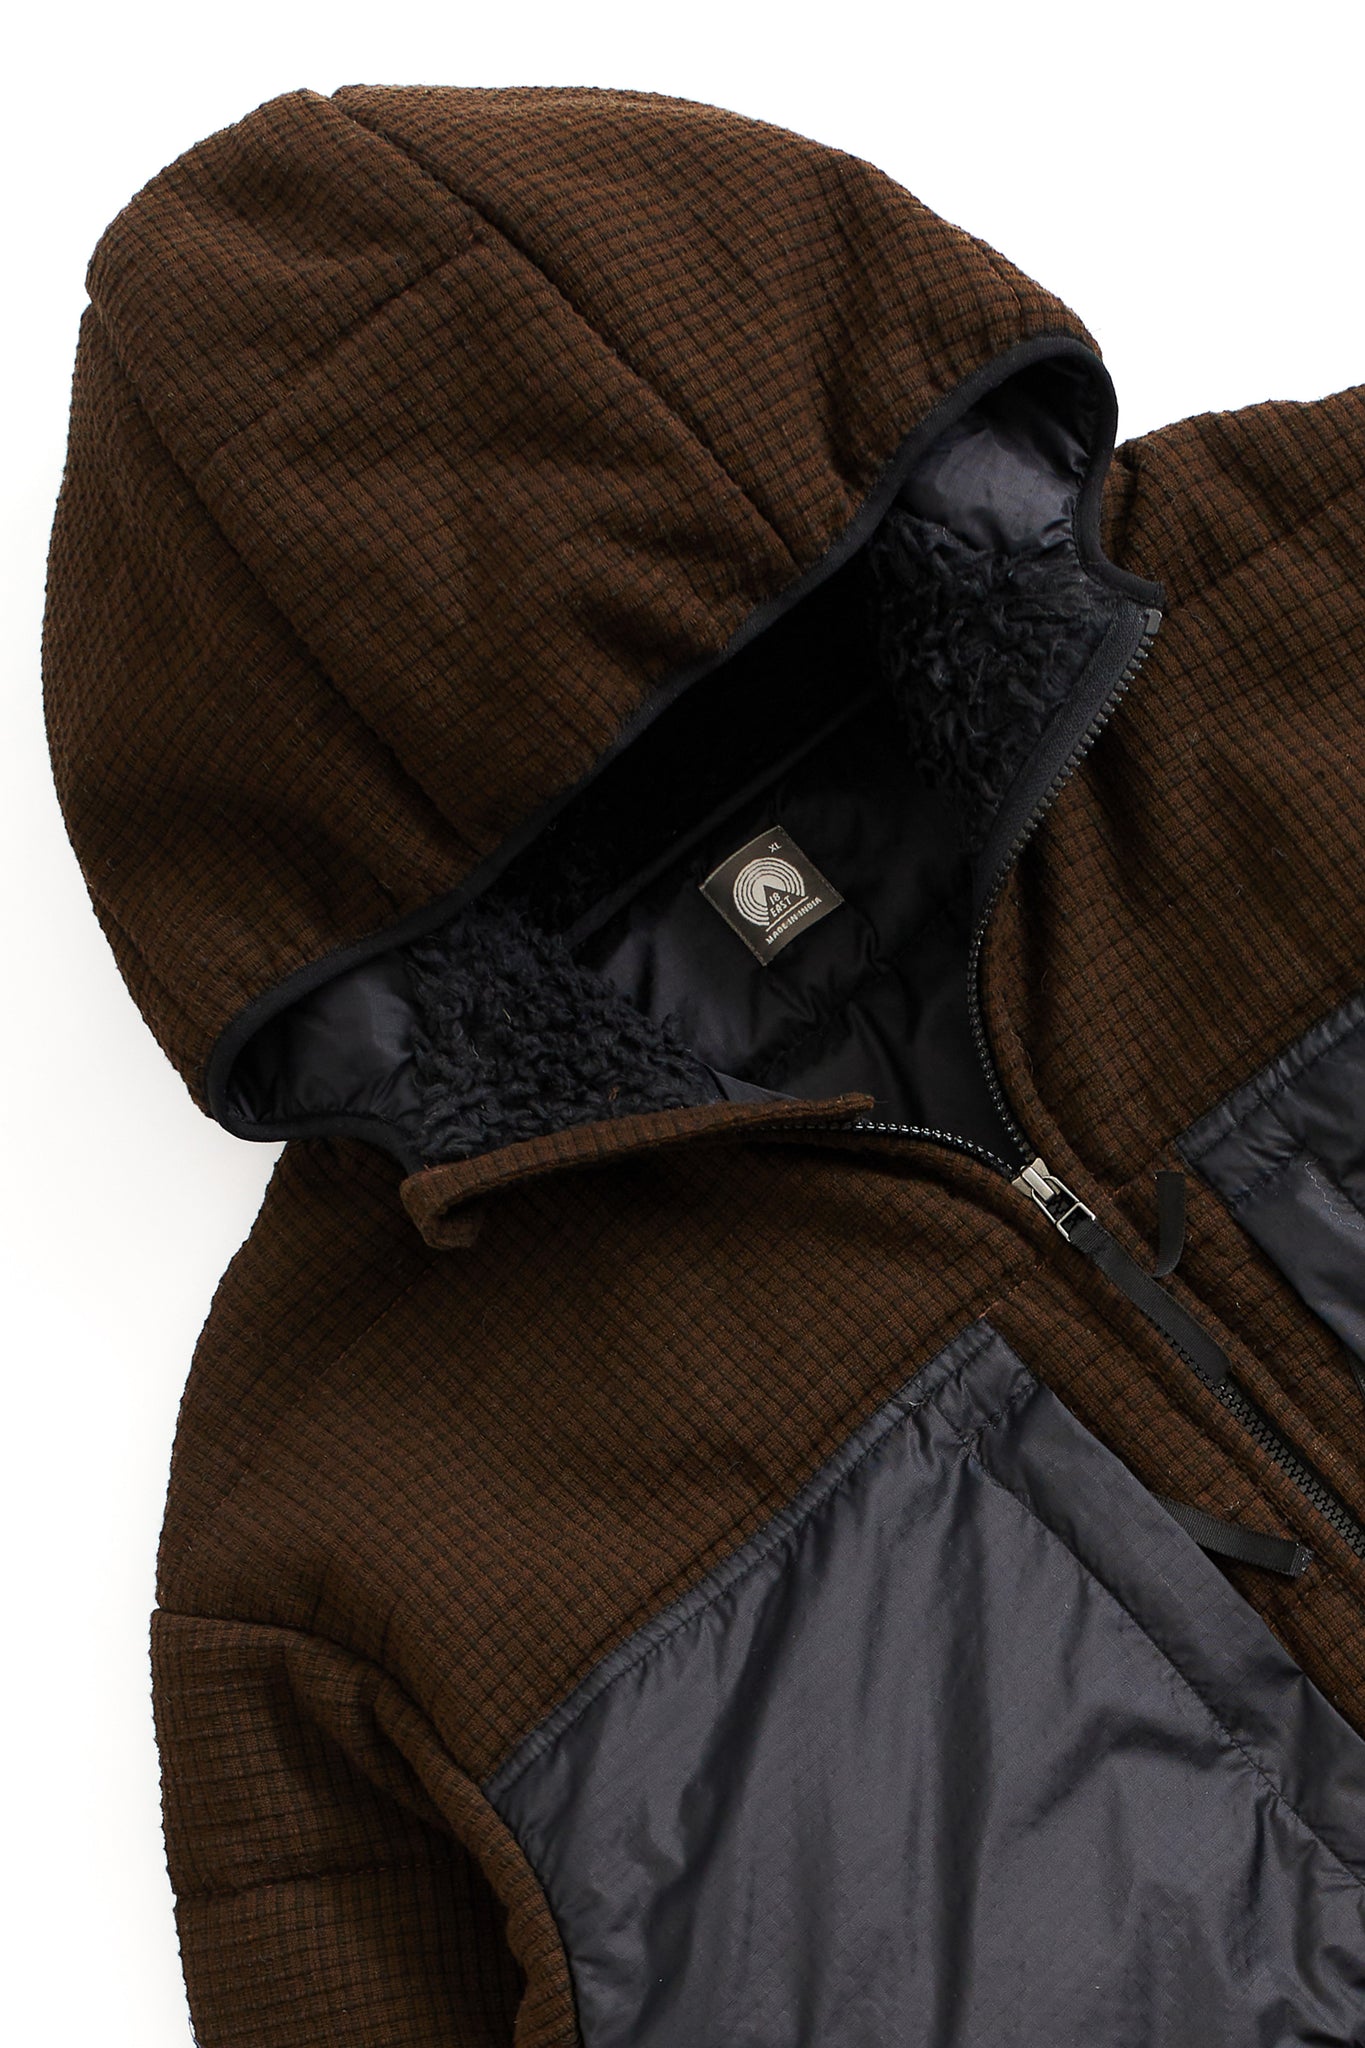 MALLET'S QUILTED PARKA - DARK CHOCOLATE HANDWOVEN RIPSTOP